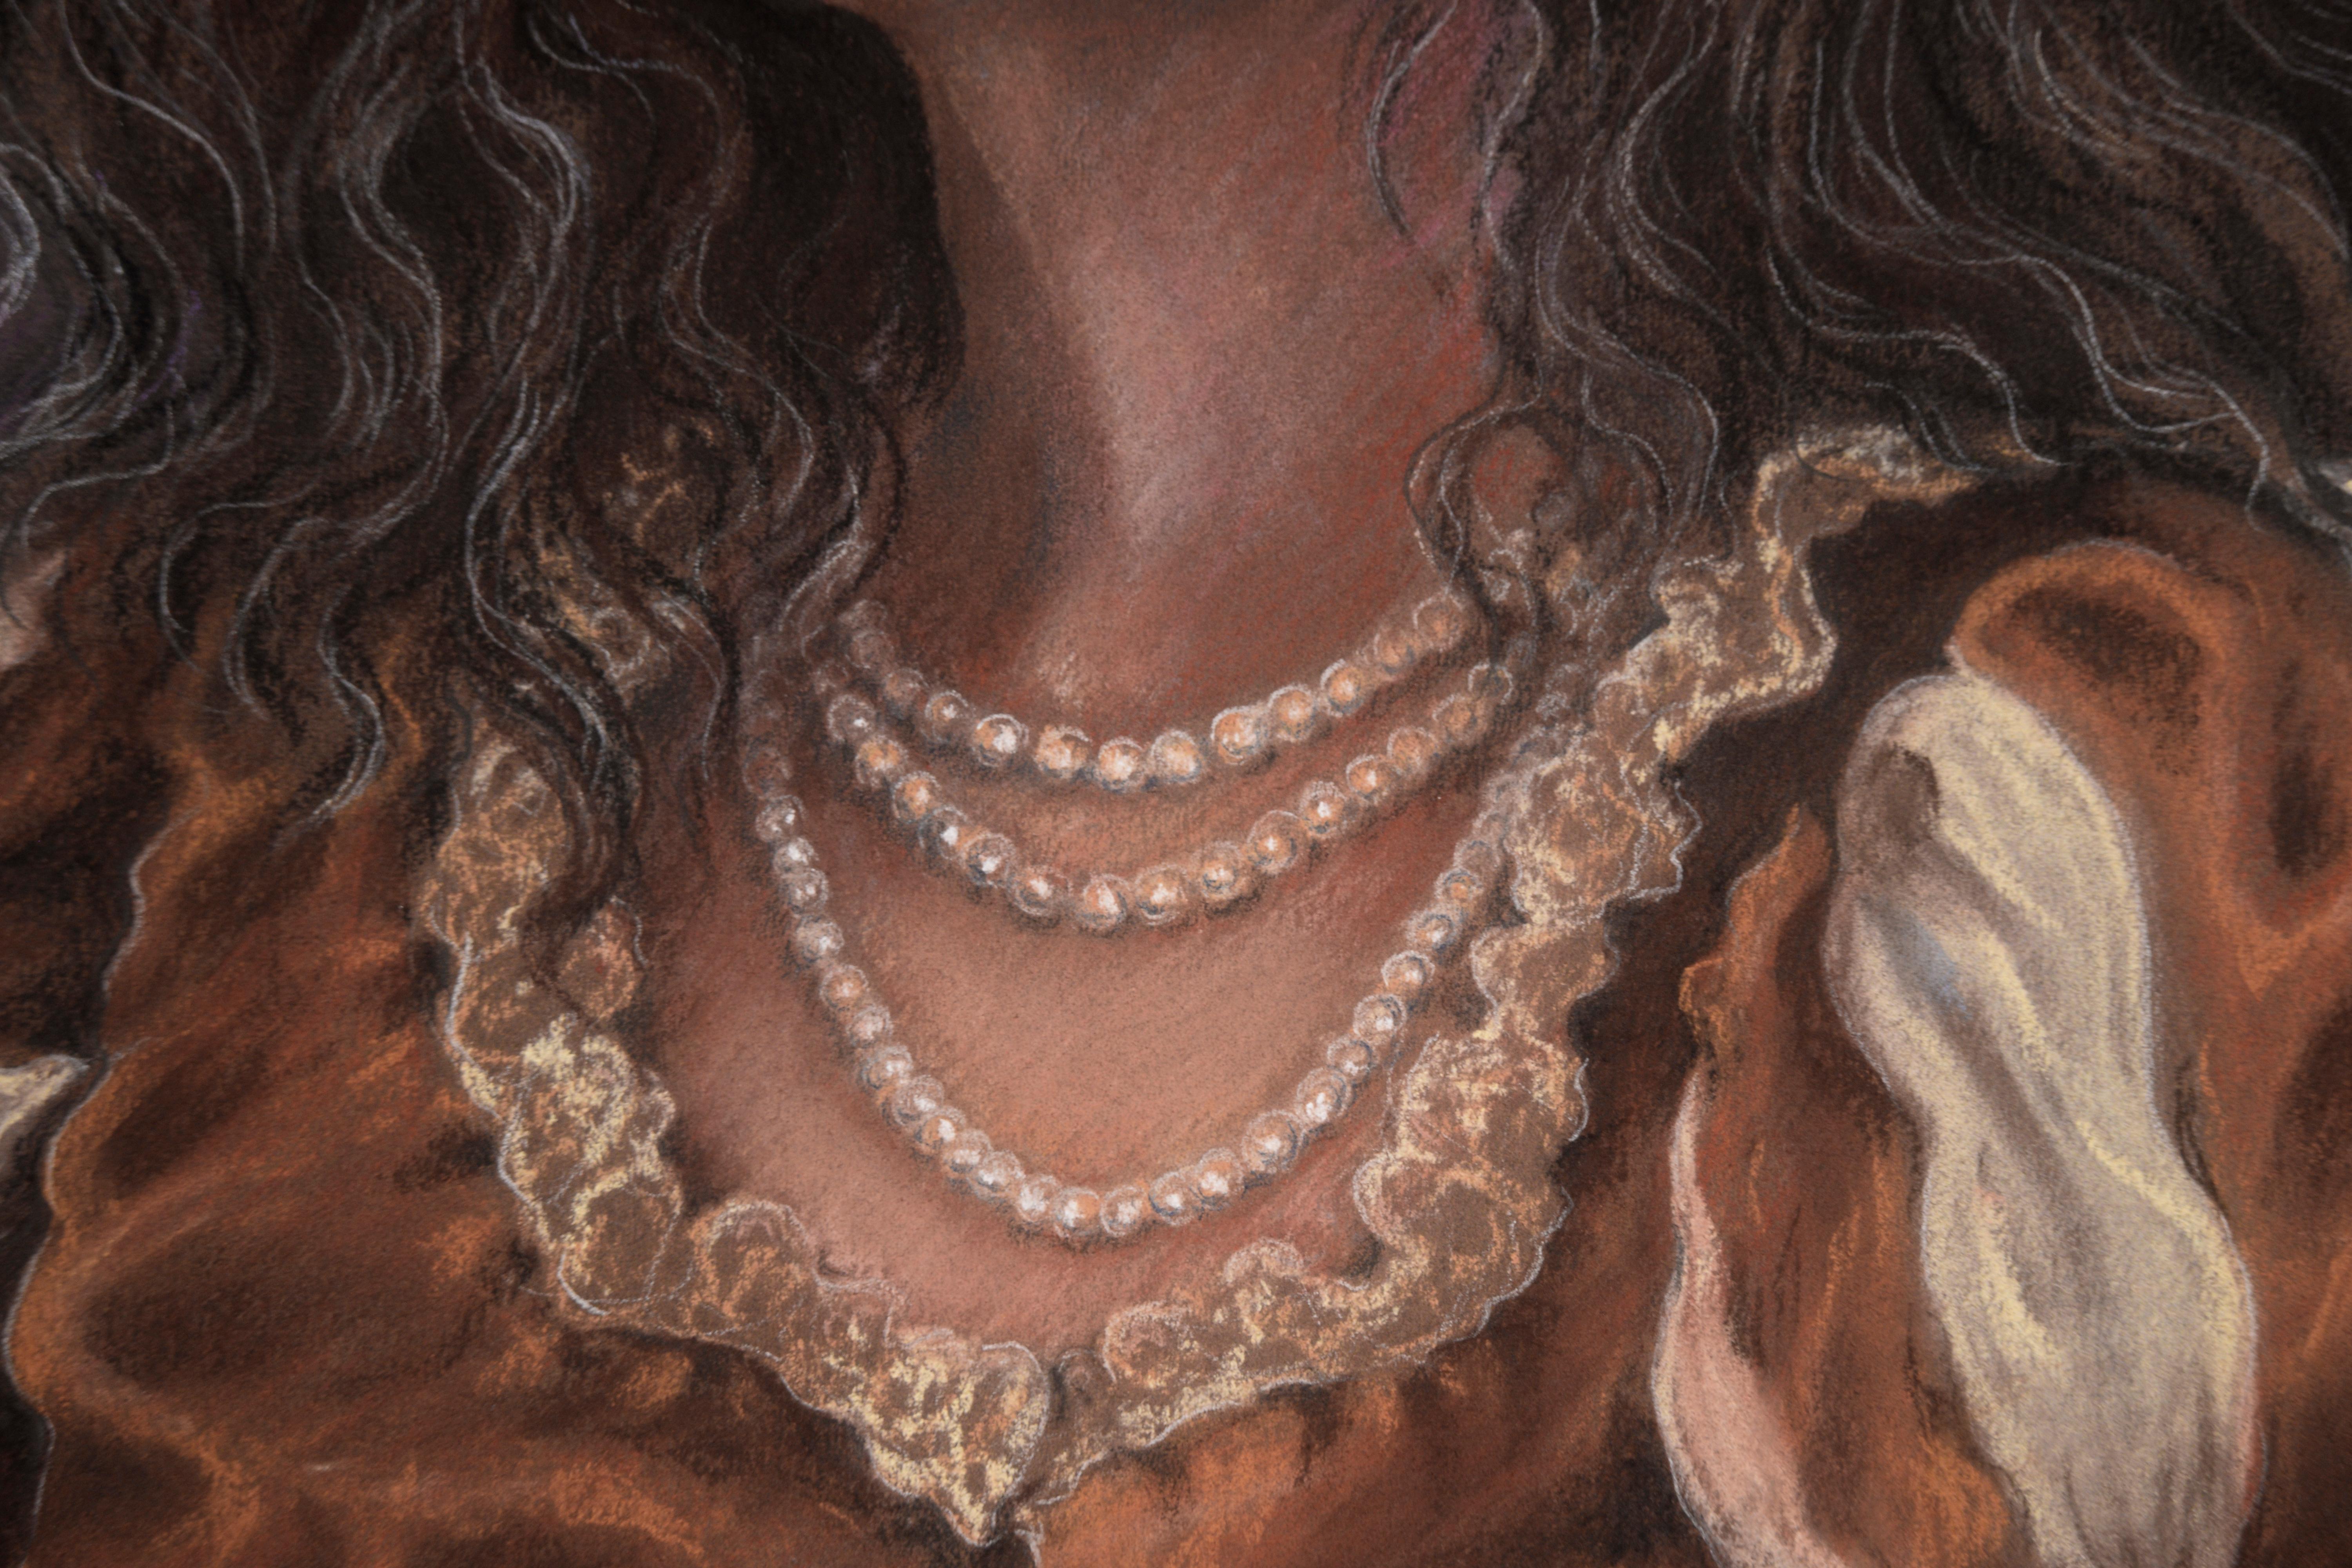 Intricately detailed realist figurative pastel drawing of a woman in Shakespearean clothing by Palo Alto artist Marilyn Thompson (American, 1927-2015), 1989. The woman's pearl necklace and puffy sleeved garment, as well as each individual strand of